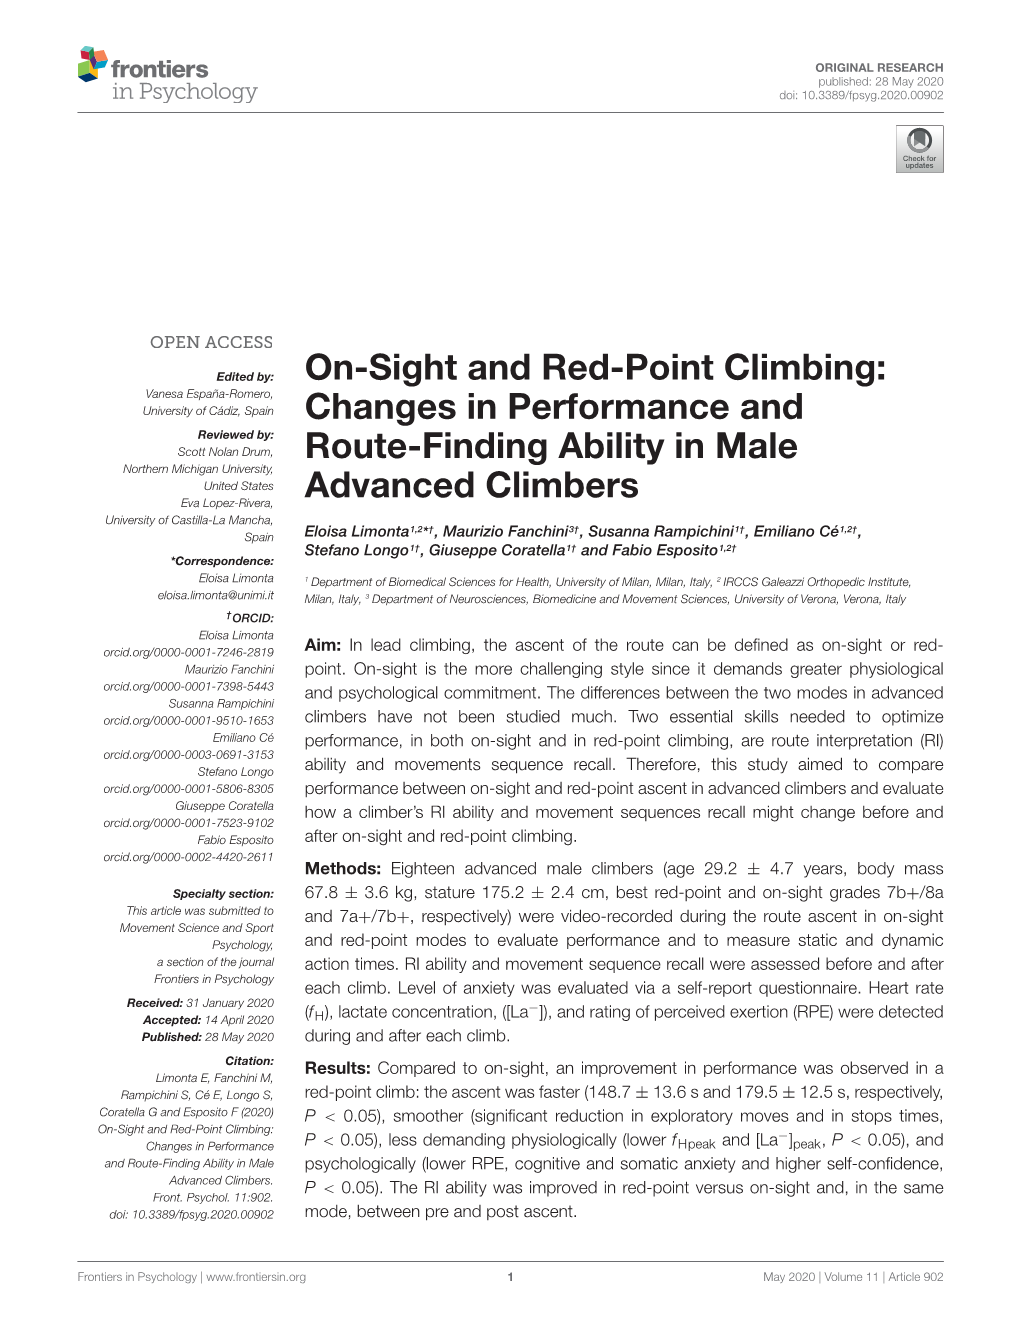 On-Sight and Red-Point Climbing: Changes in Performance And